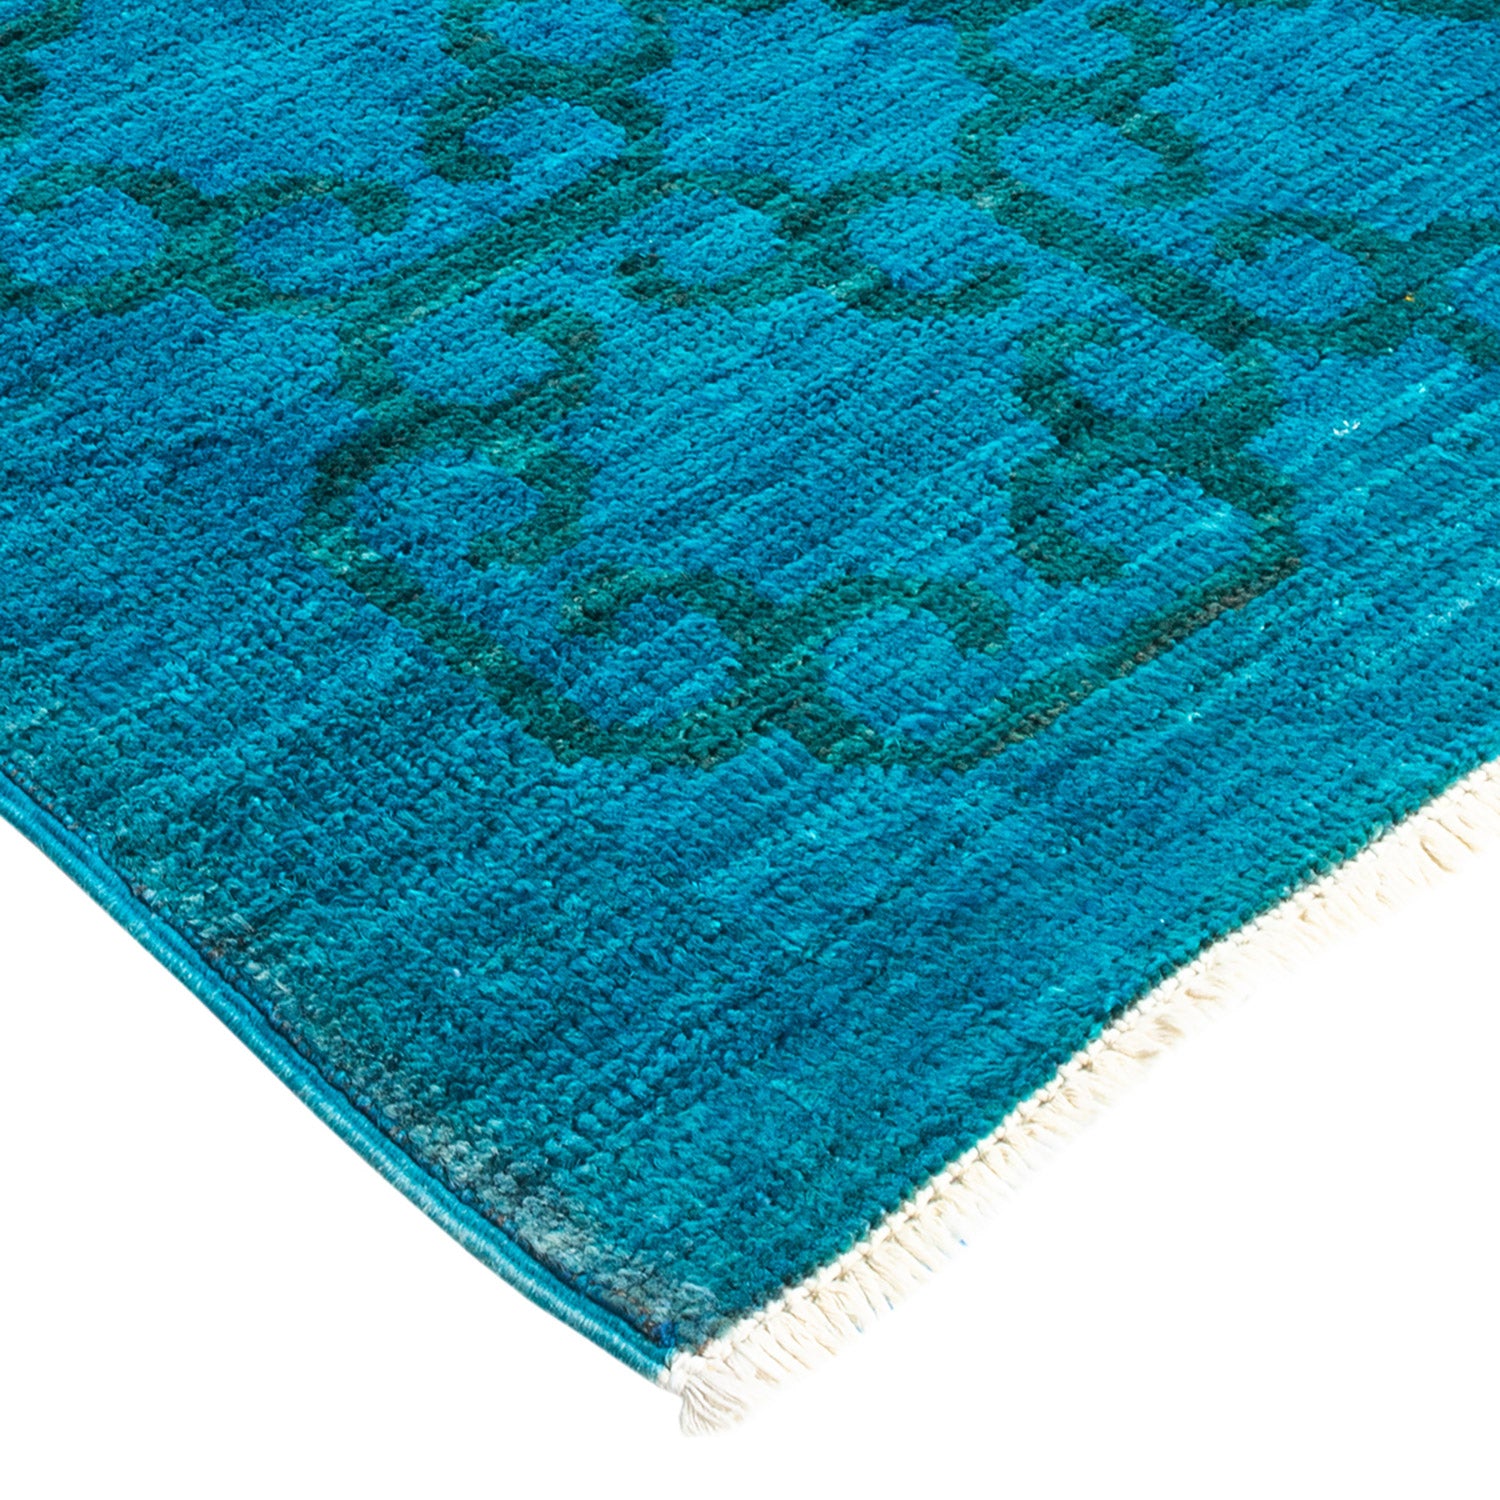 Plush blue rug with textured geometric pattern and fringe detail.